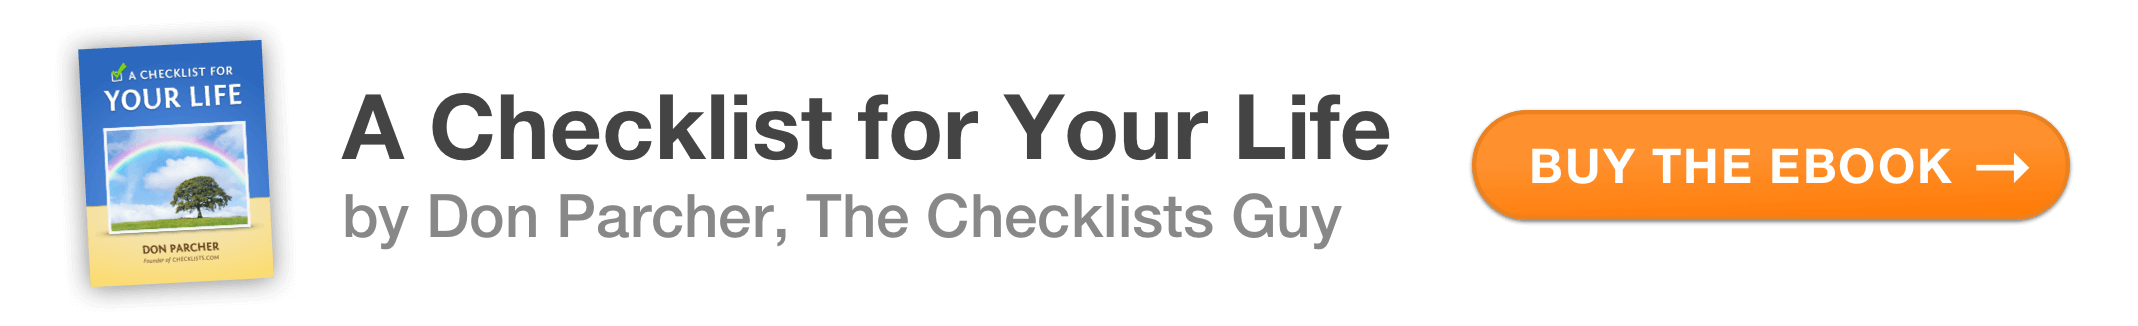 Ebook: A Checklist for Your Life